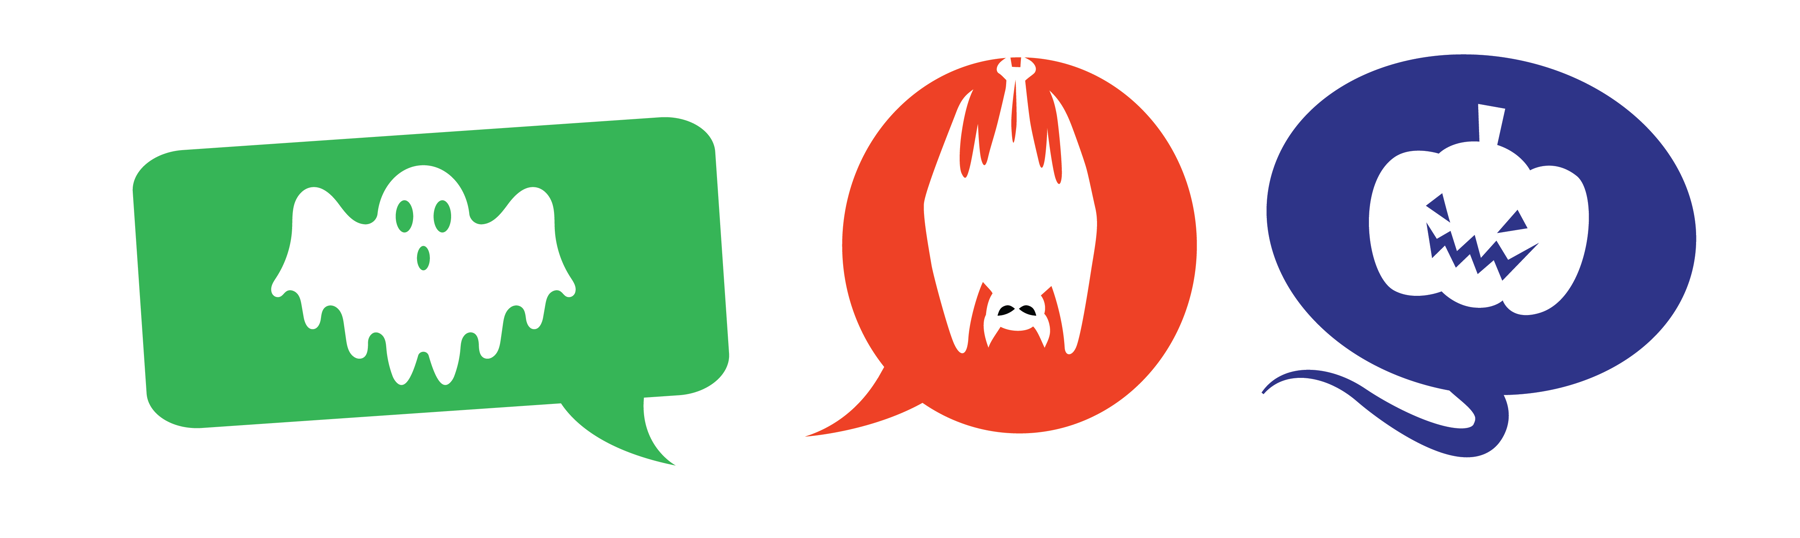 The image shows three graphics. The left one is a green rectangle speech bubble with a white ghost in the middle, the middle speech bubble is circle with a white bat hanging upside down in the middle, and the speech bubble on the right is a navy circle speech bubble with a carved white pumpkin in the middle.